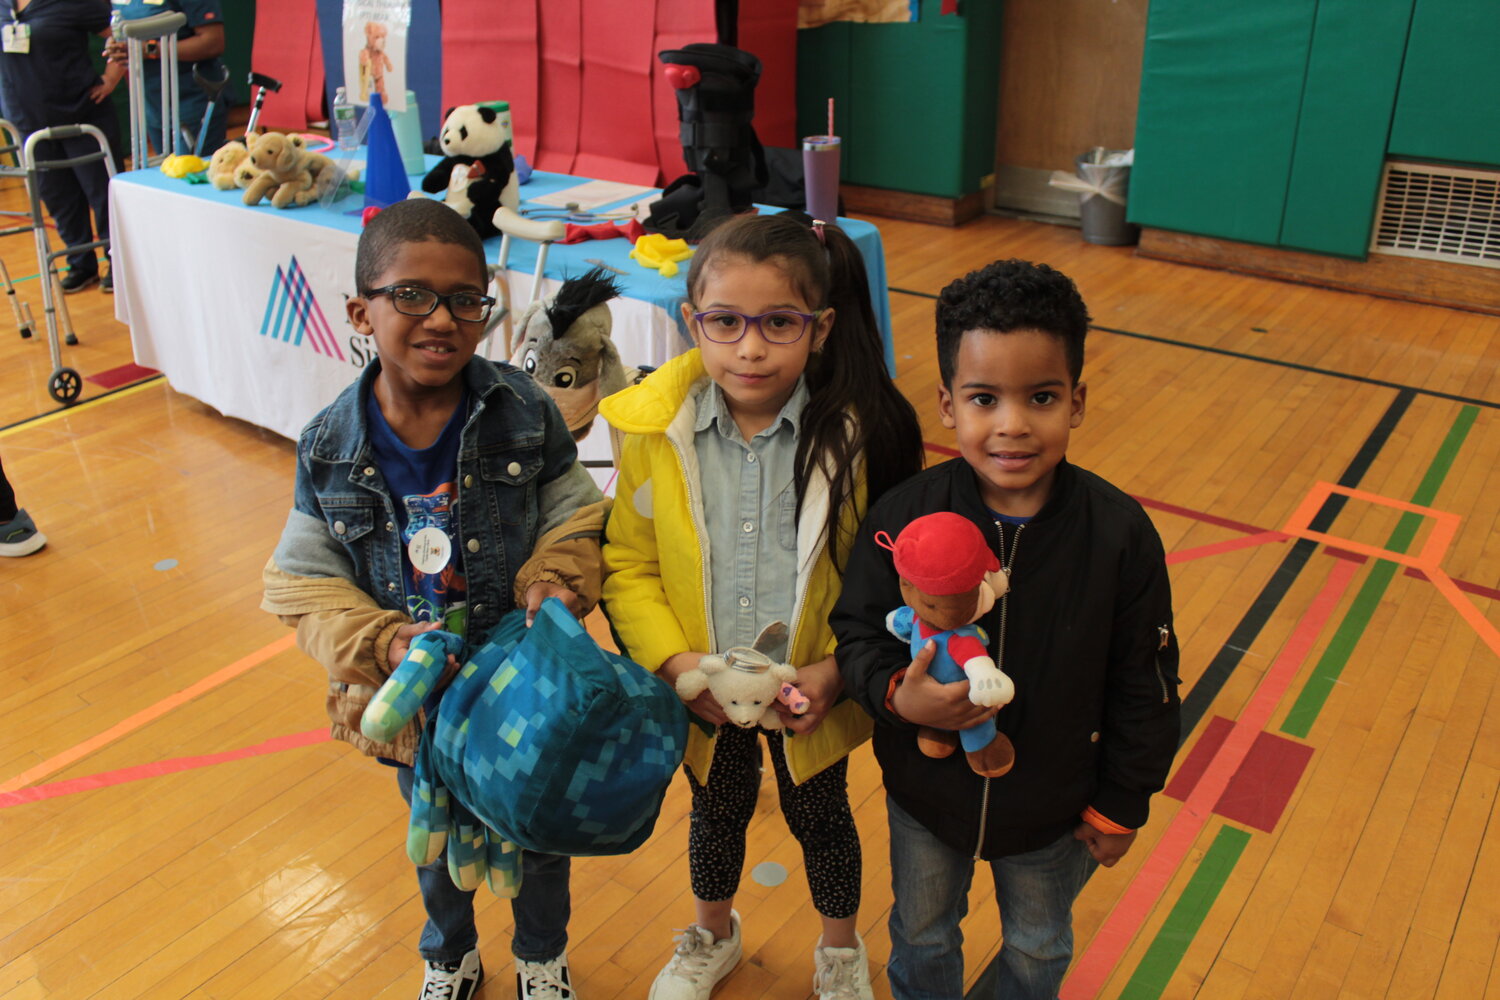 Benjamin Fernandez, Aliza’s Rodriguez and Mason Espinal took part in the Teddy Bear Clinic, sponsored by Mount Sinai-South Nassau hospital, where they learned about hospital visits and medical procedures.